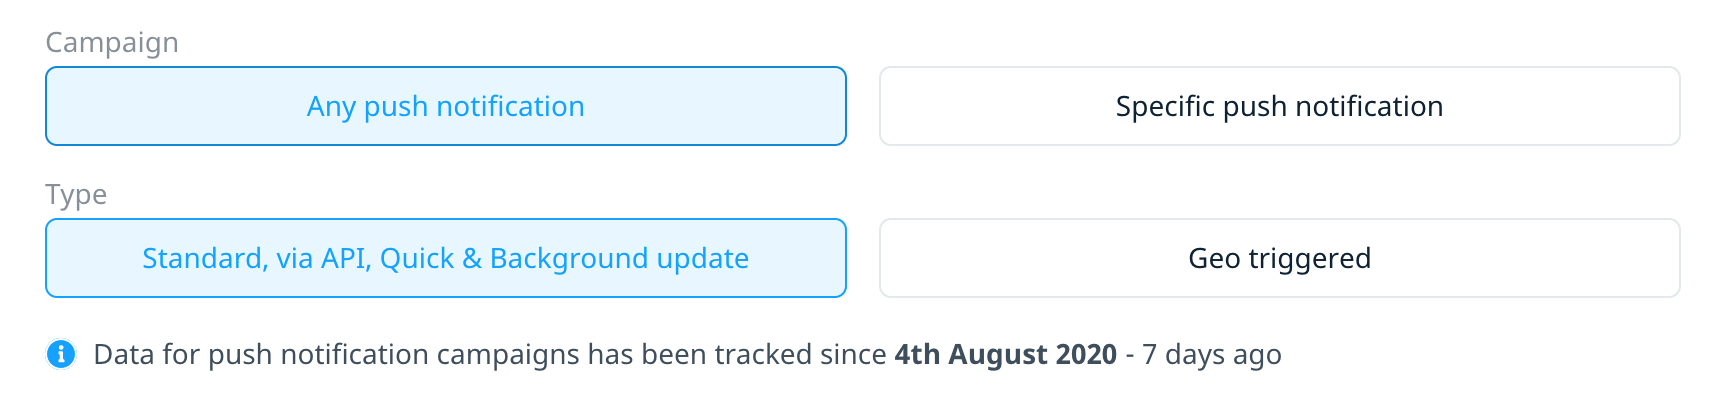 Info message showing the date from which Swrve has tracked campaign data for all campaigns